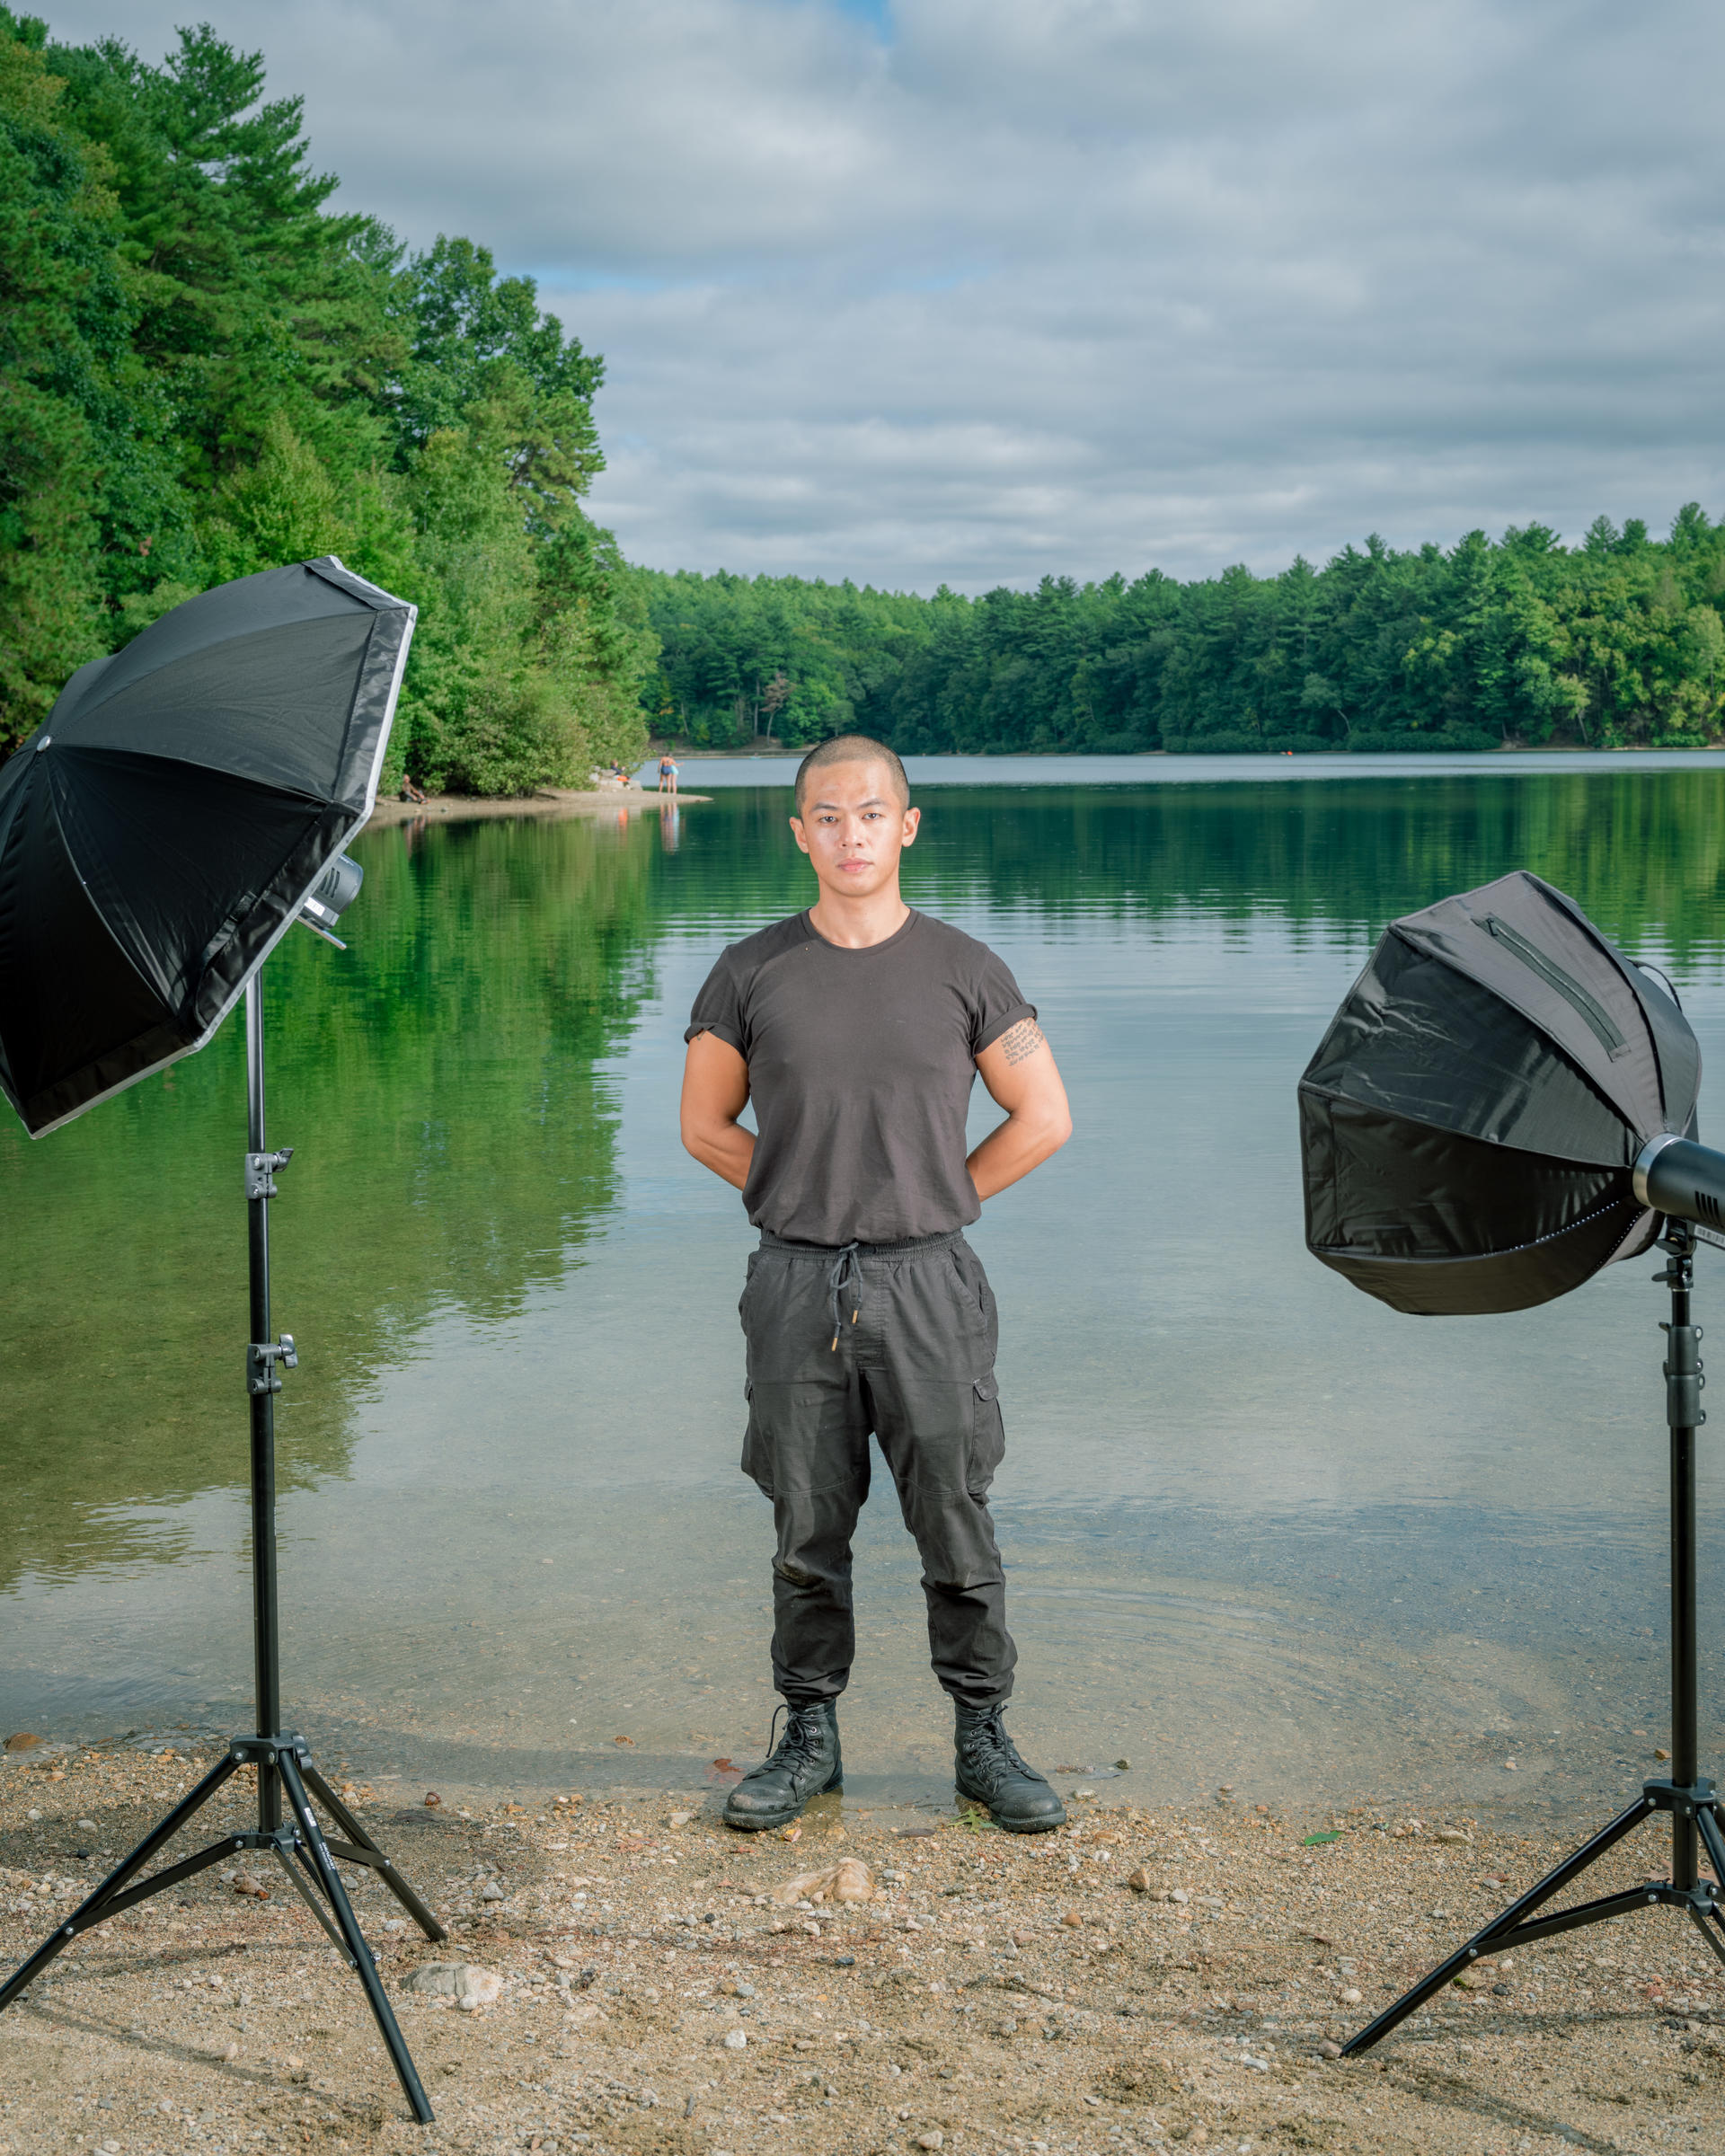 A man wearing all black standings shoulder-width apart at the shore of lake. Two flash strobes frame him.